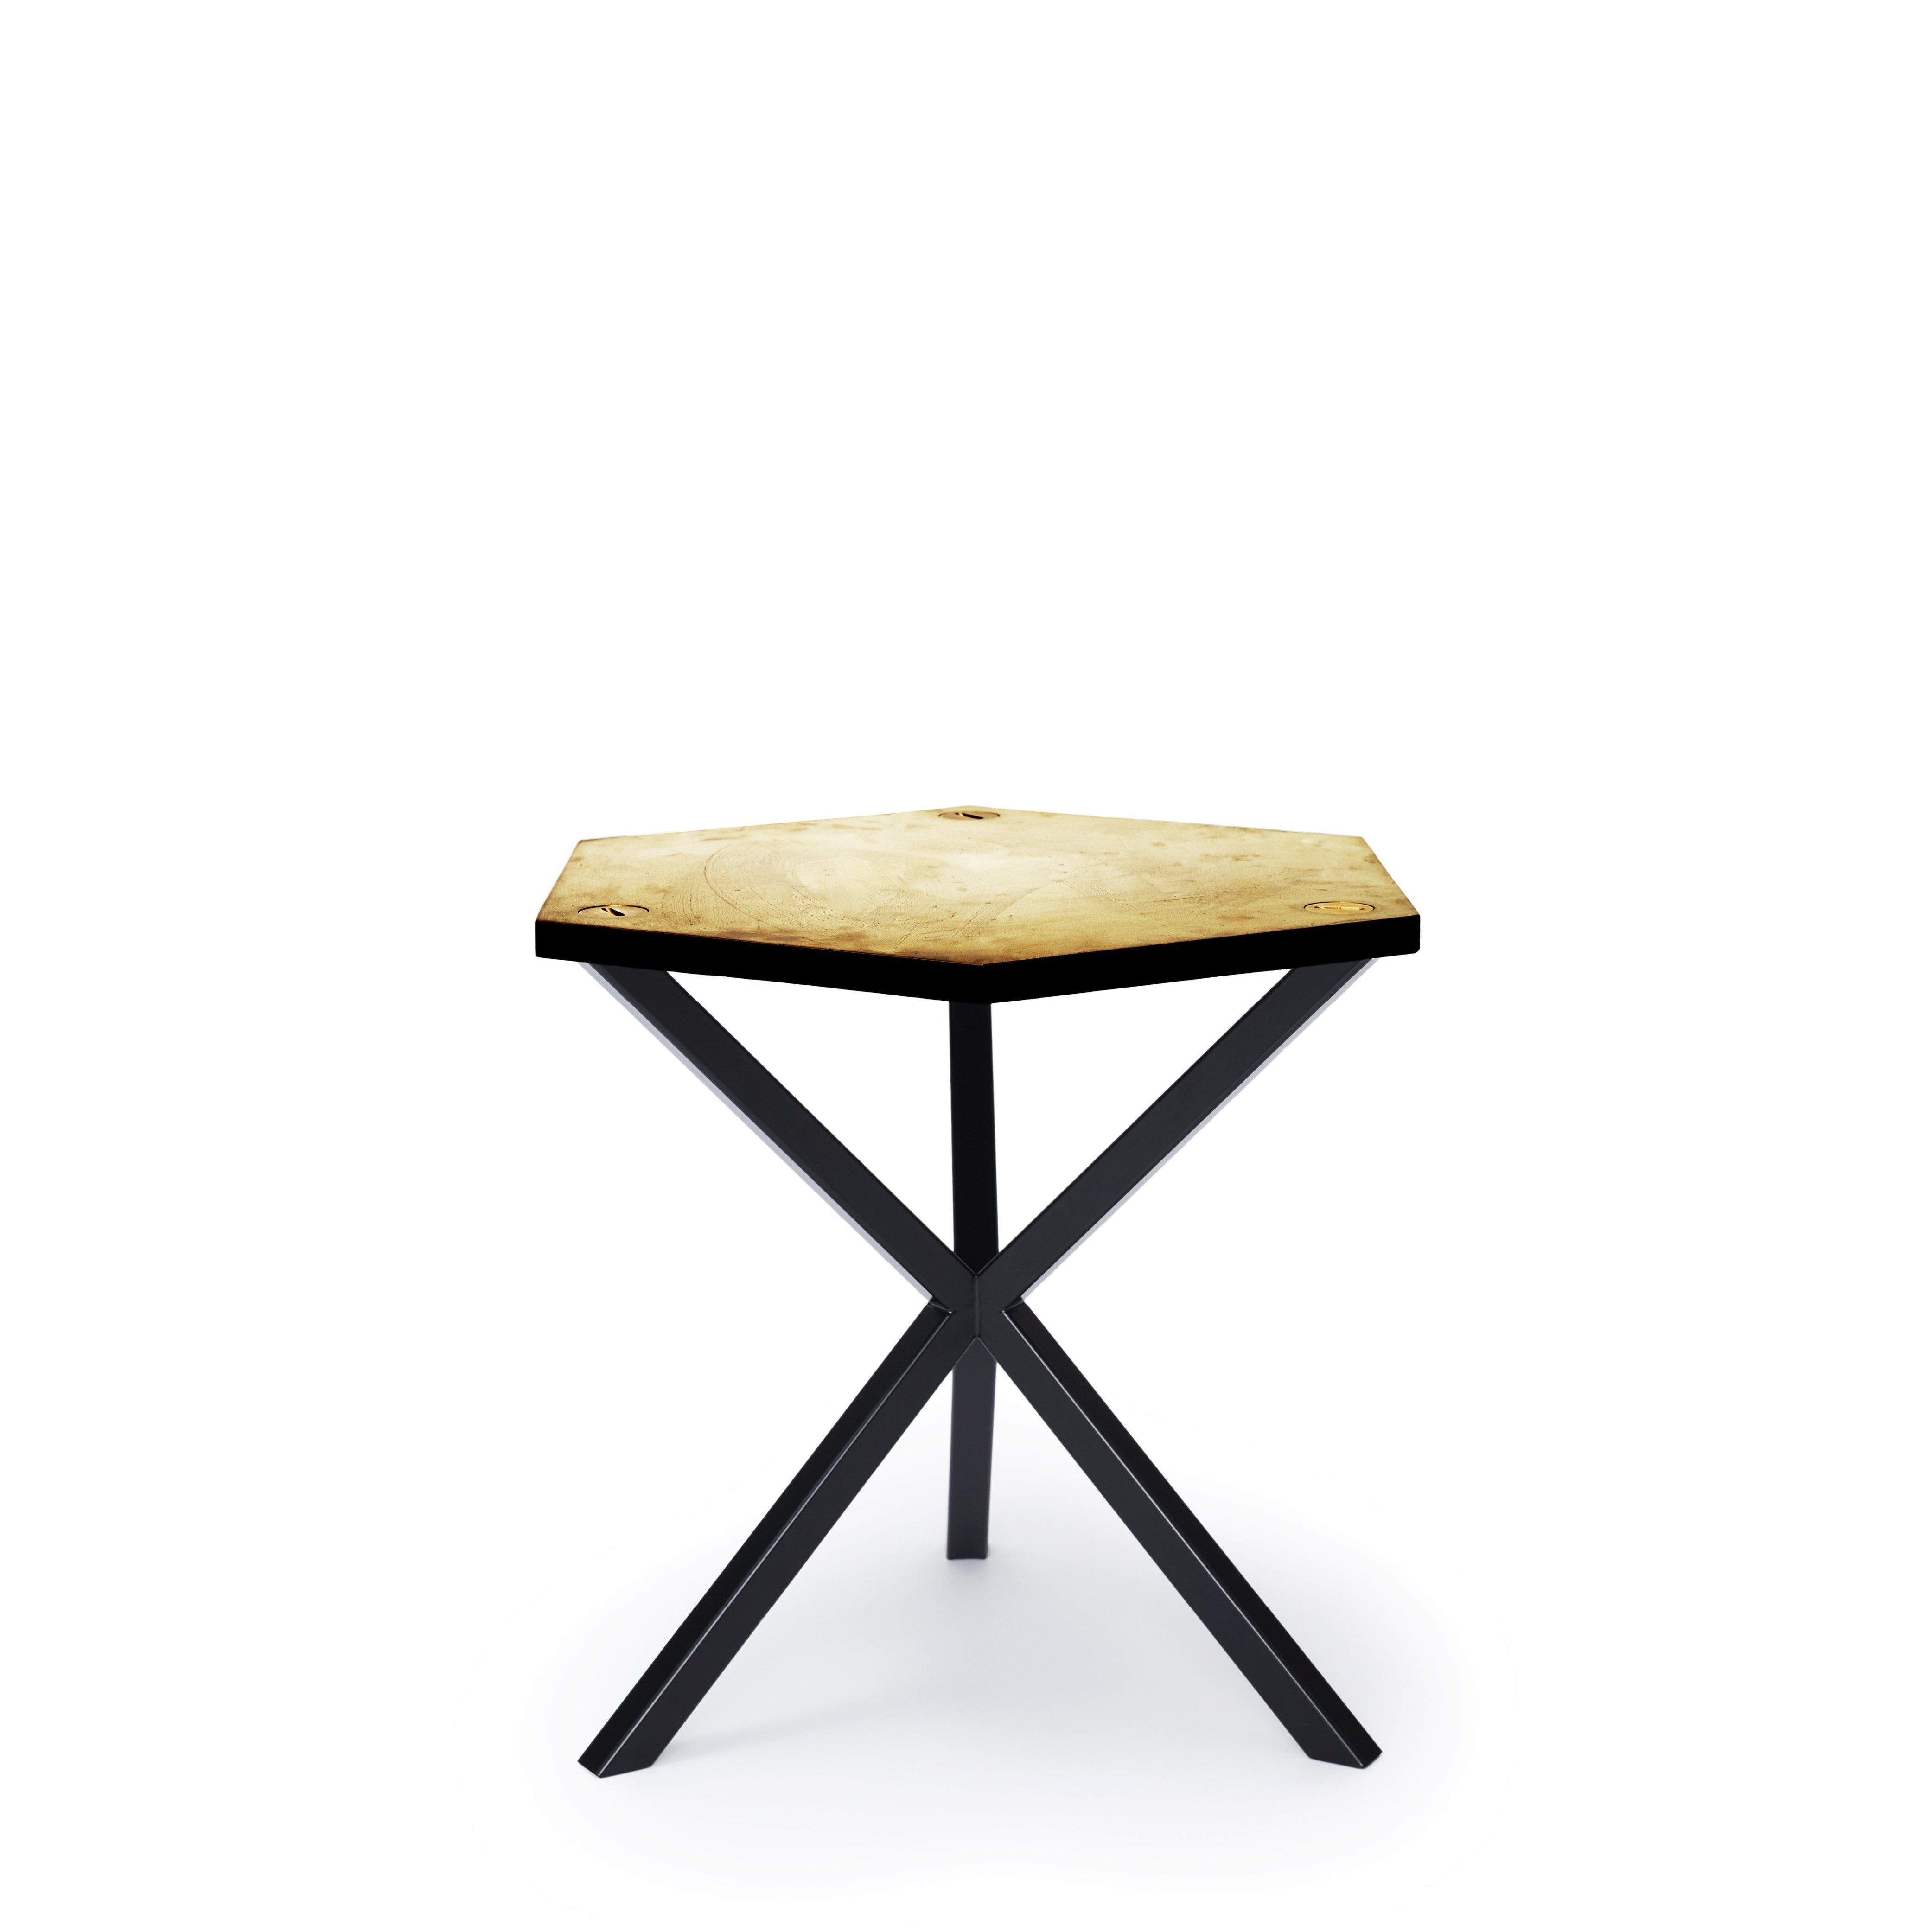 NEB Hexagonal Side Table With Top In Brass